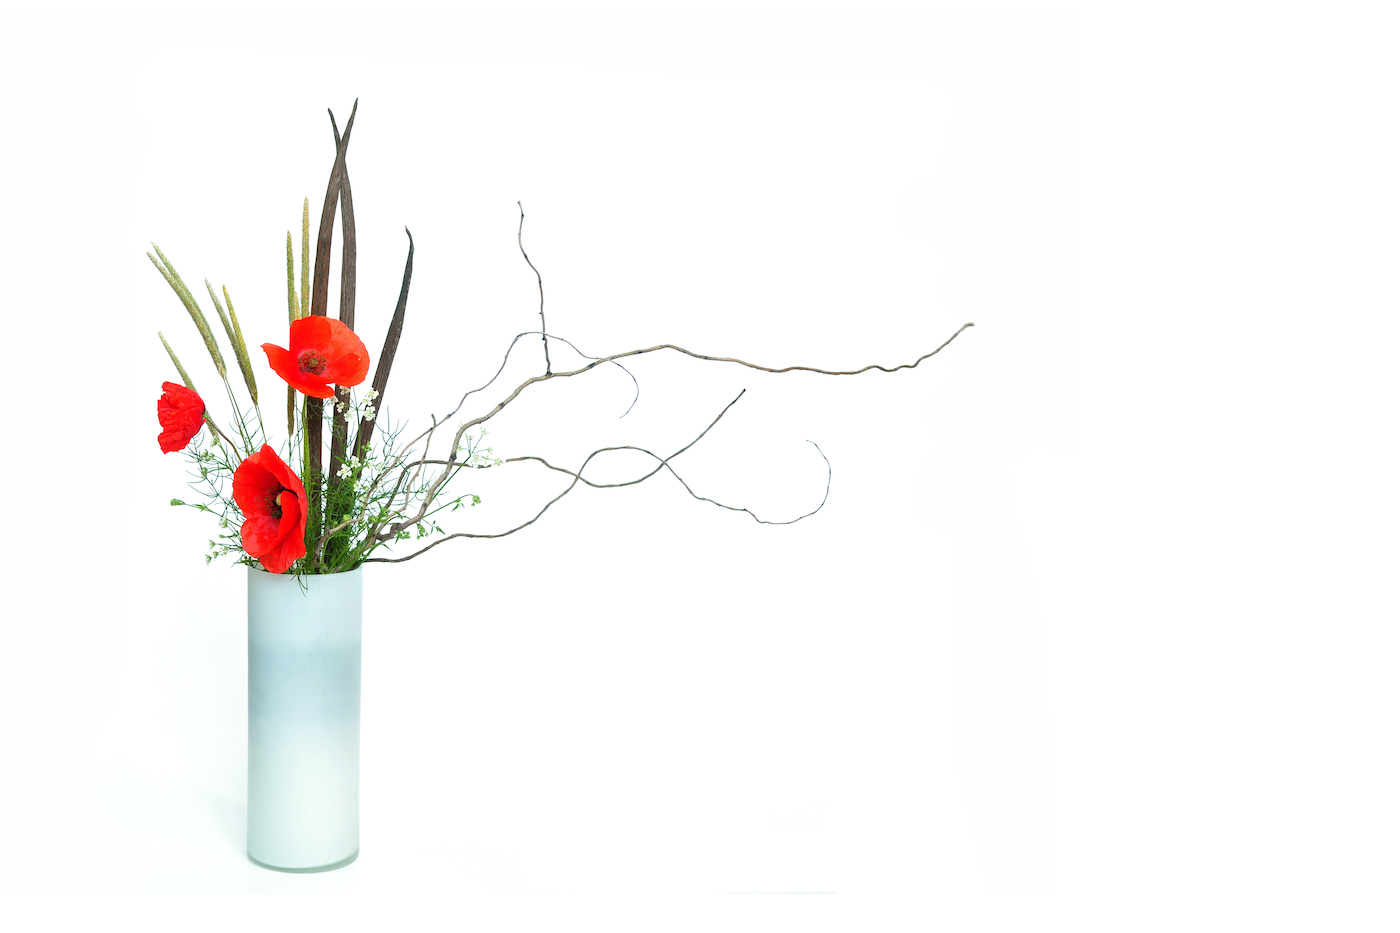 The three red poppy ikebana, nageire style on white background